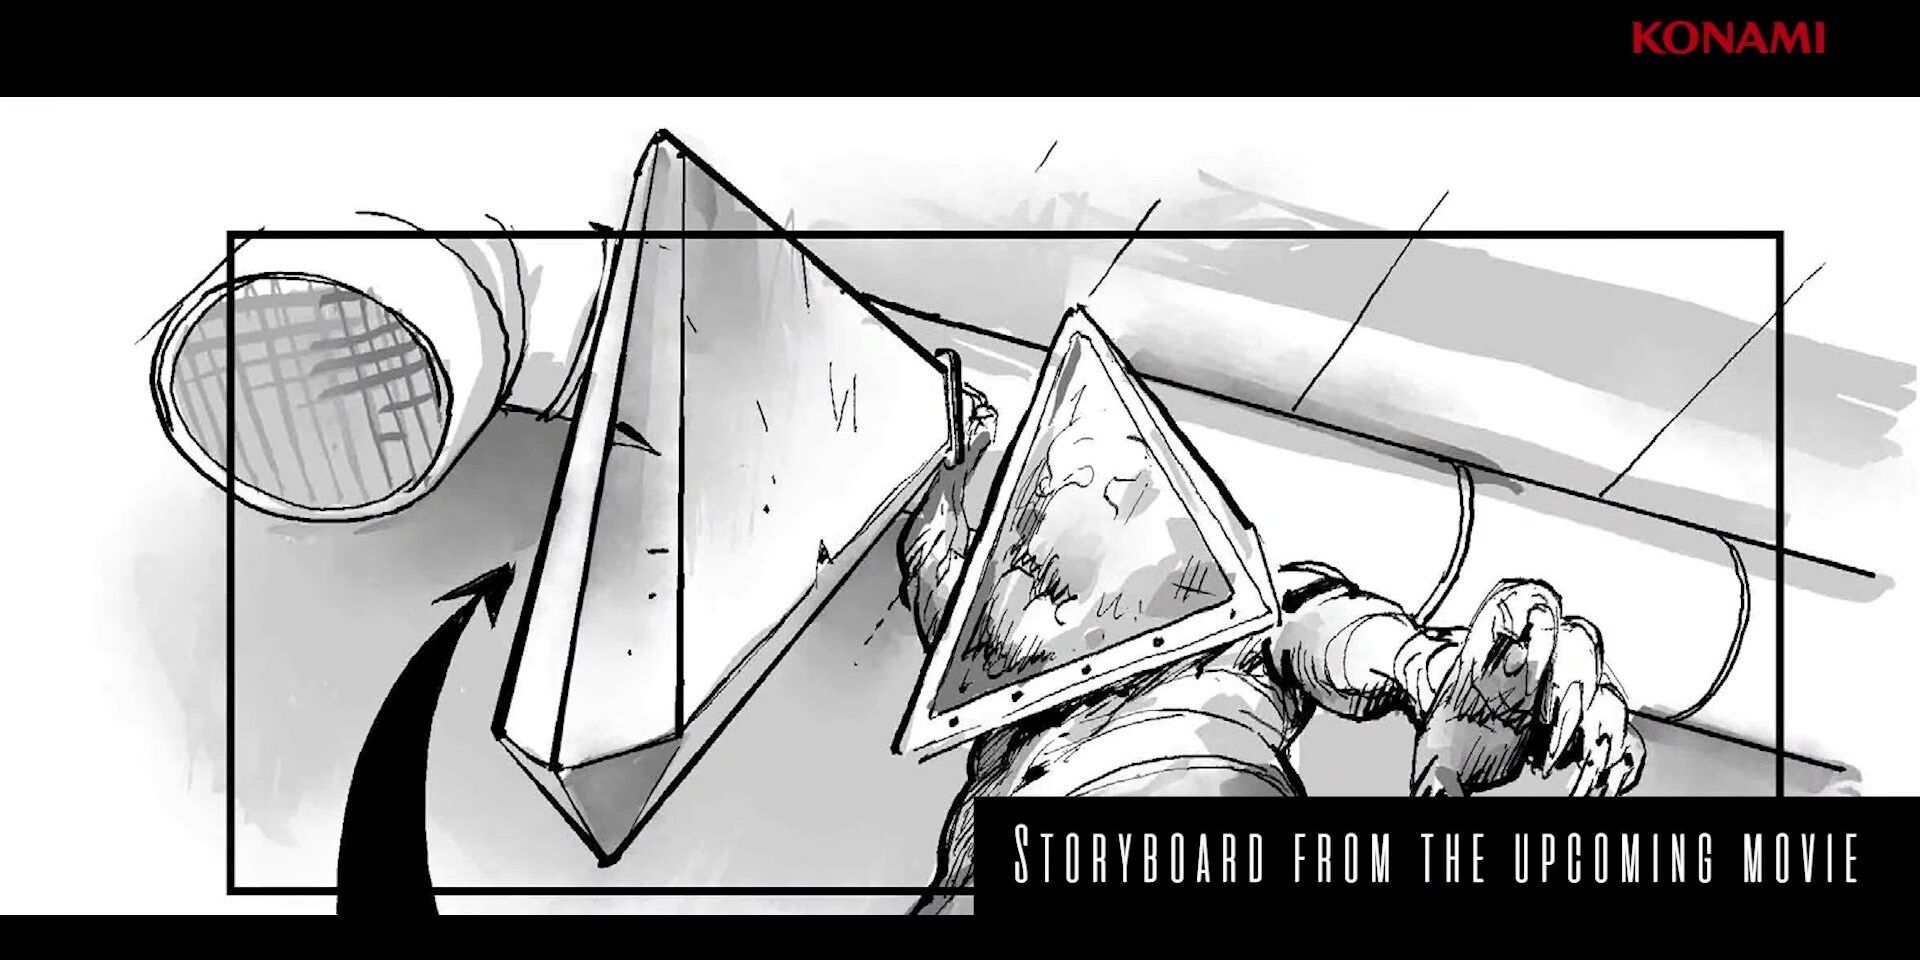 Pyramid Head prepares to kill in a storyboard for Return to Silent Hill